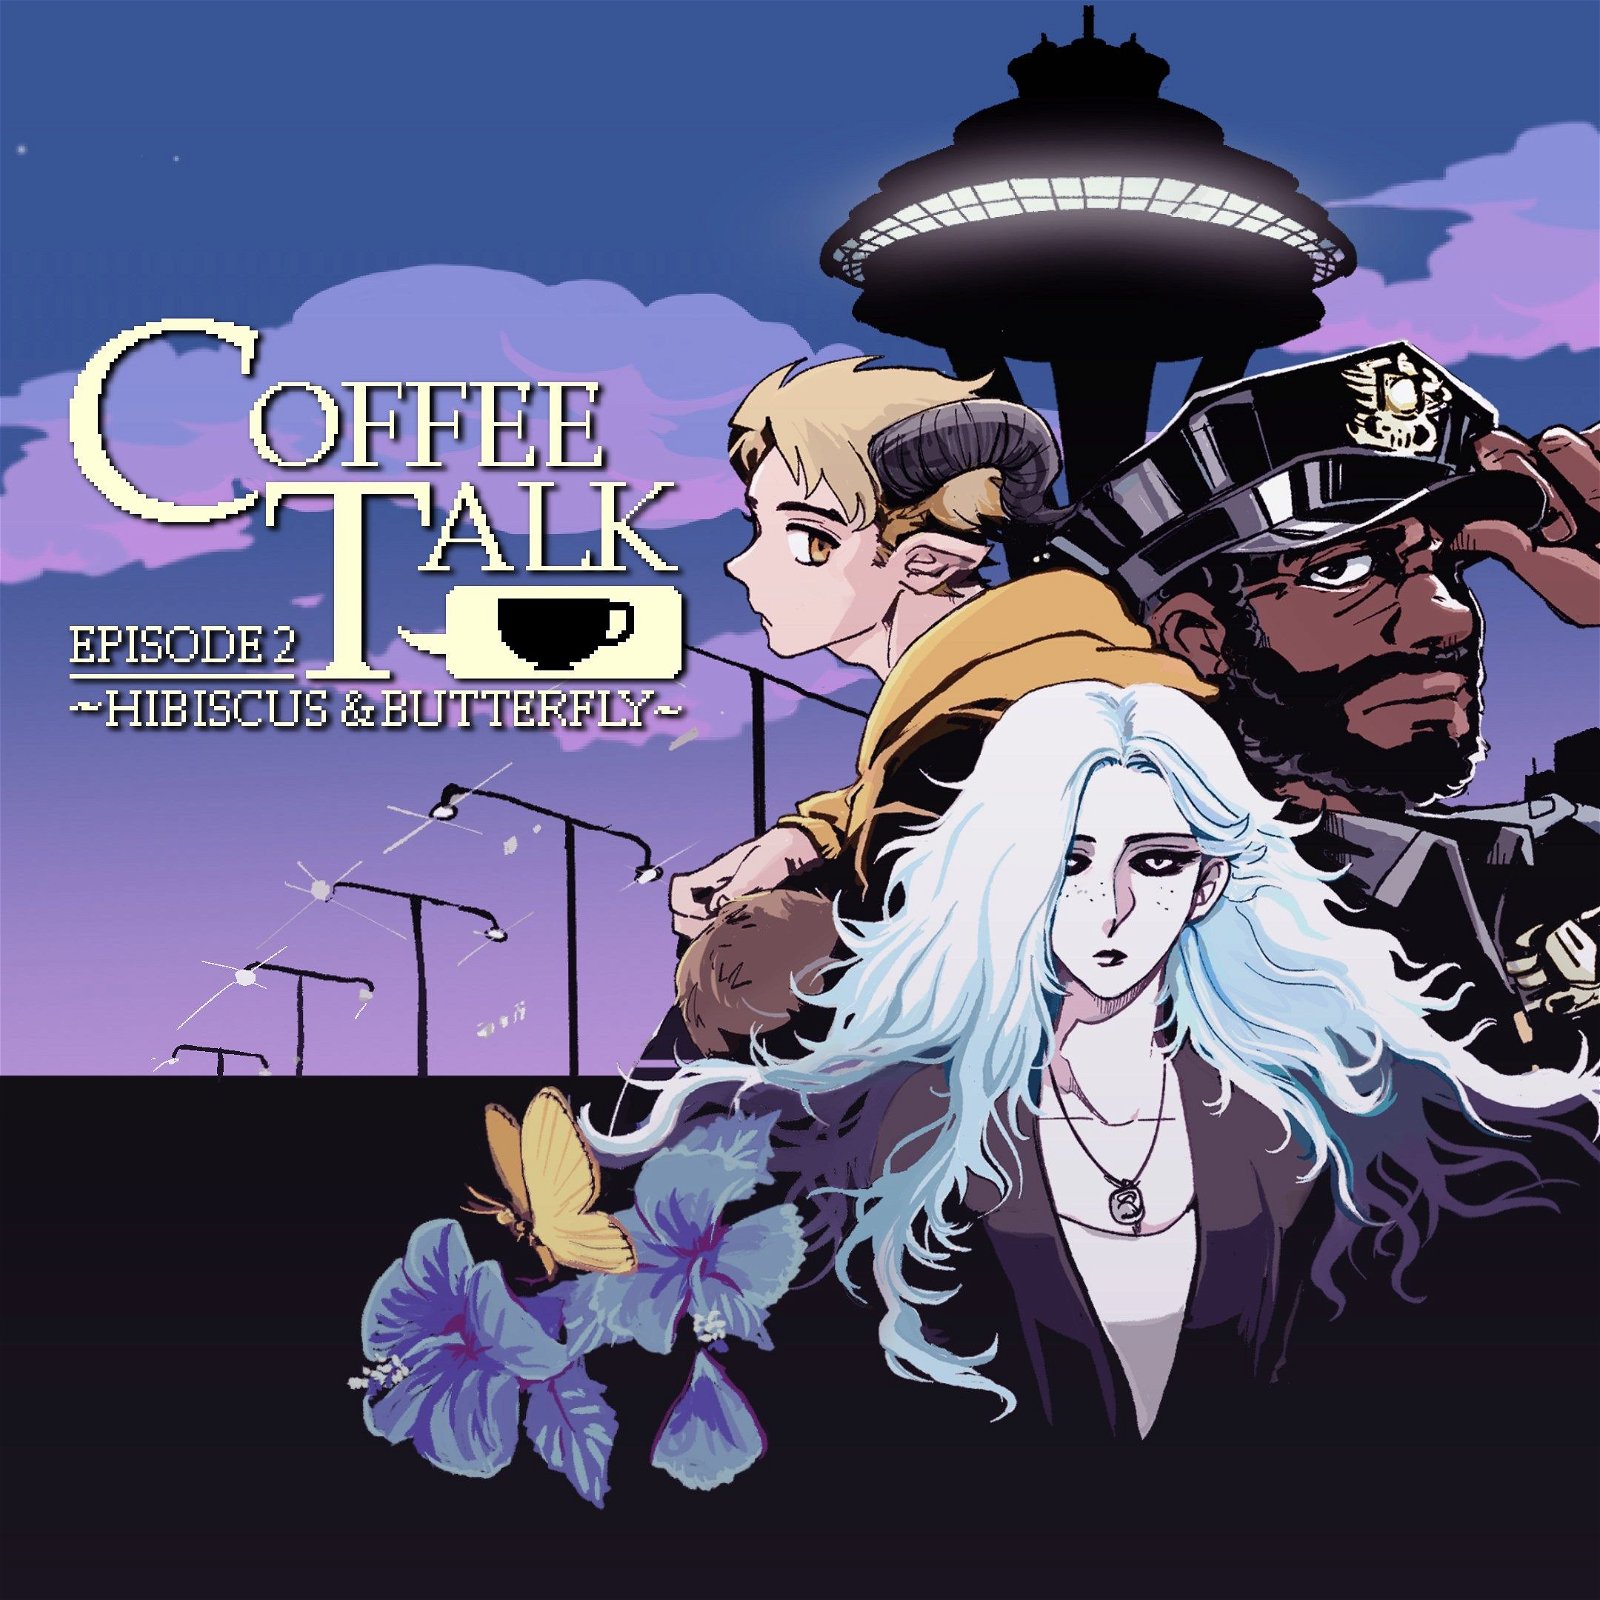 Image of Coffee Talk Episode 2: Hibiscus & Butterfly